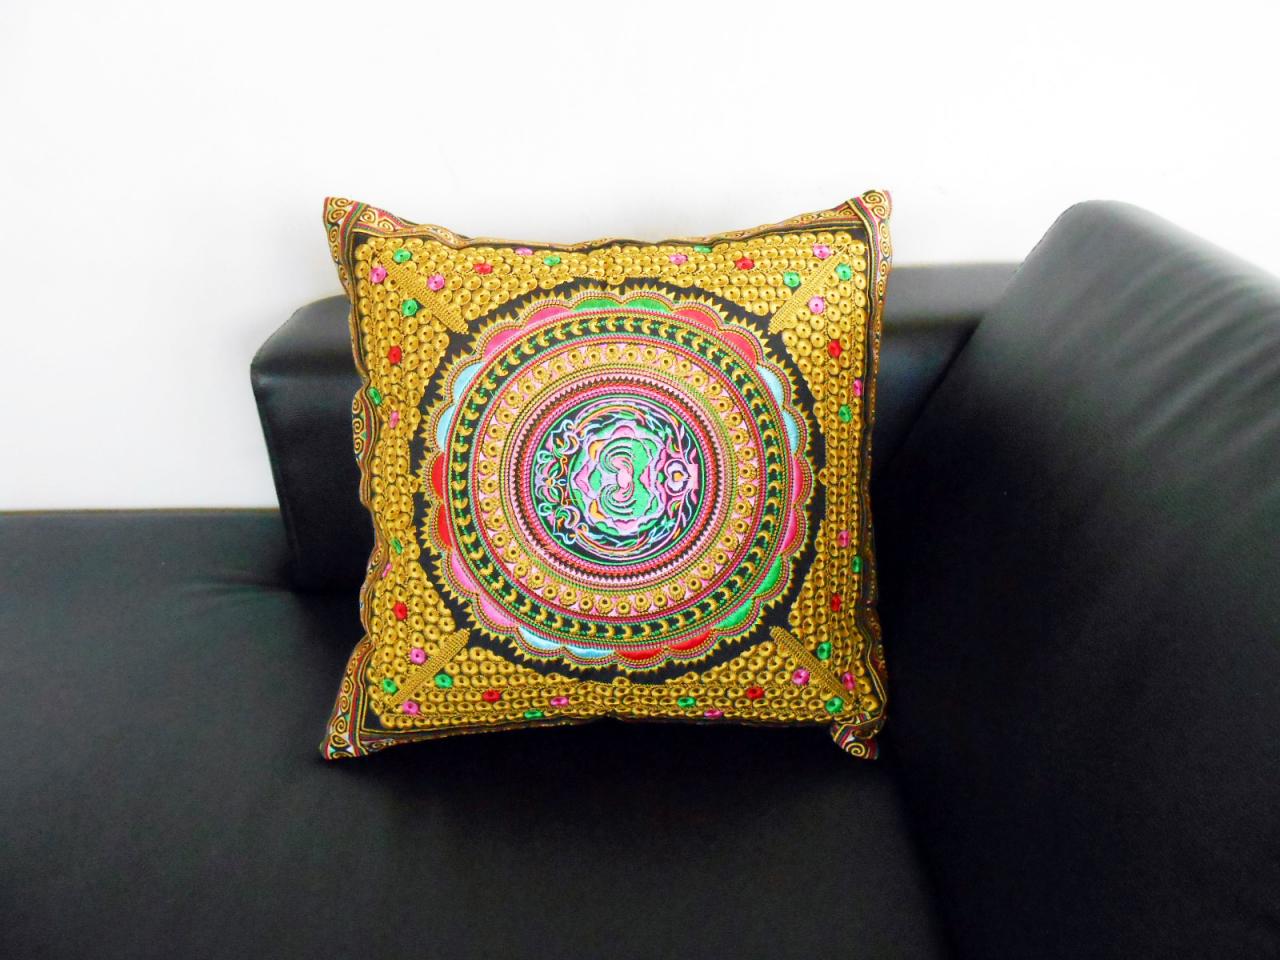 1 Pillow Cushion Handmade Exquisite Embroidered, Golden Pillow Cover, Pillowcase. (pl1003)